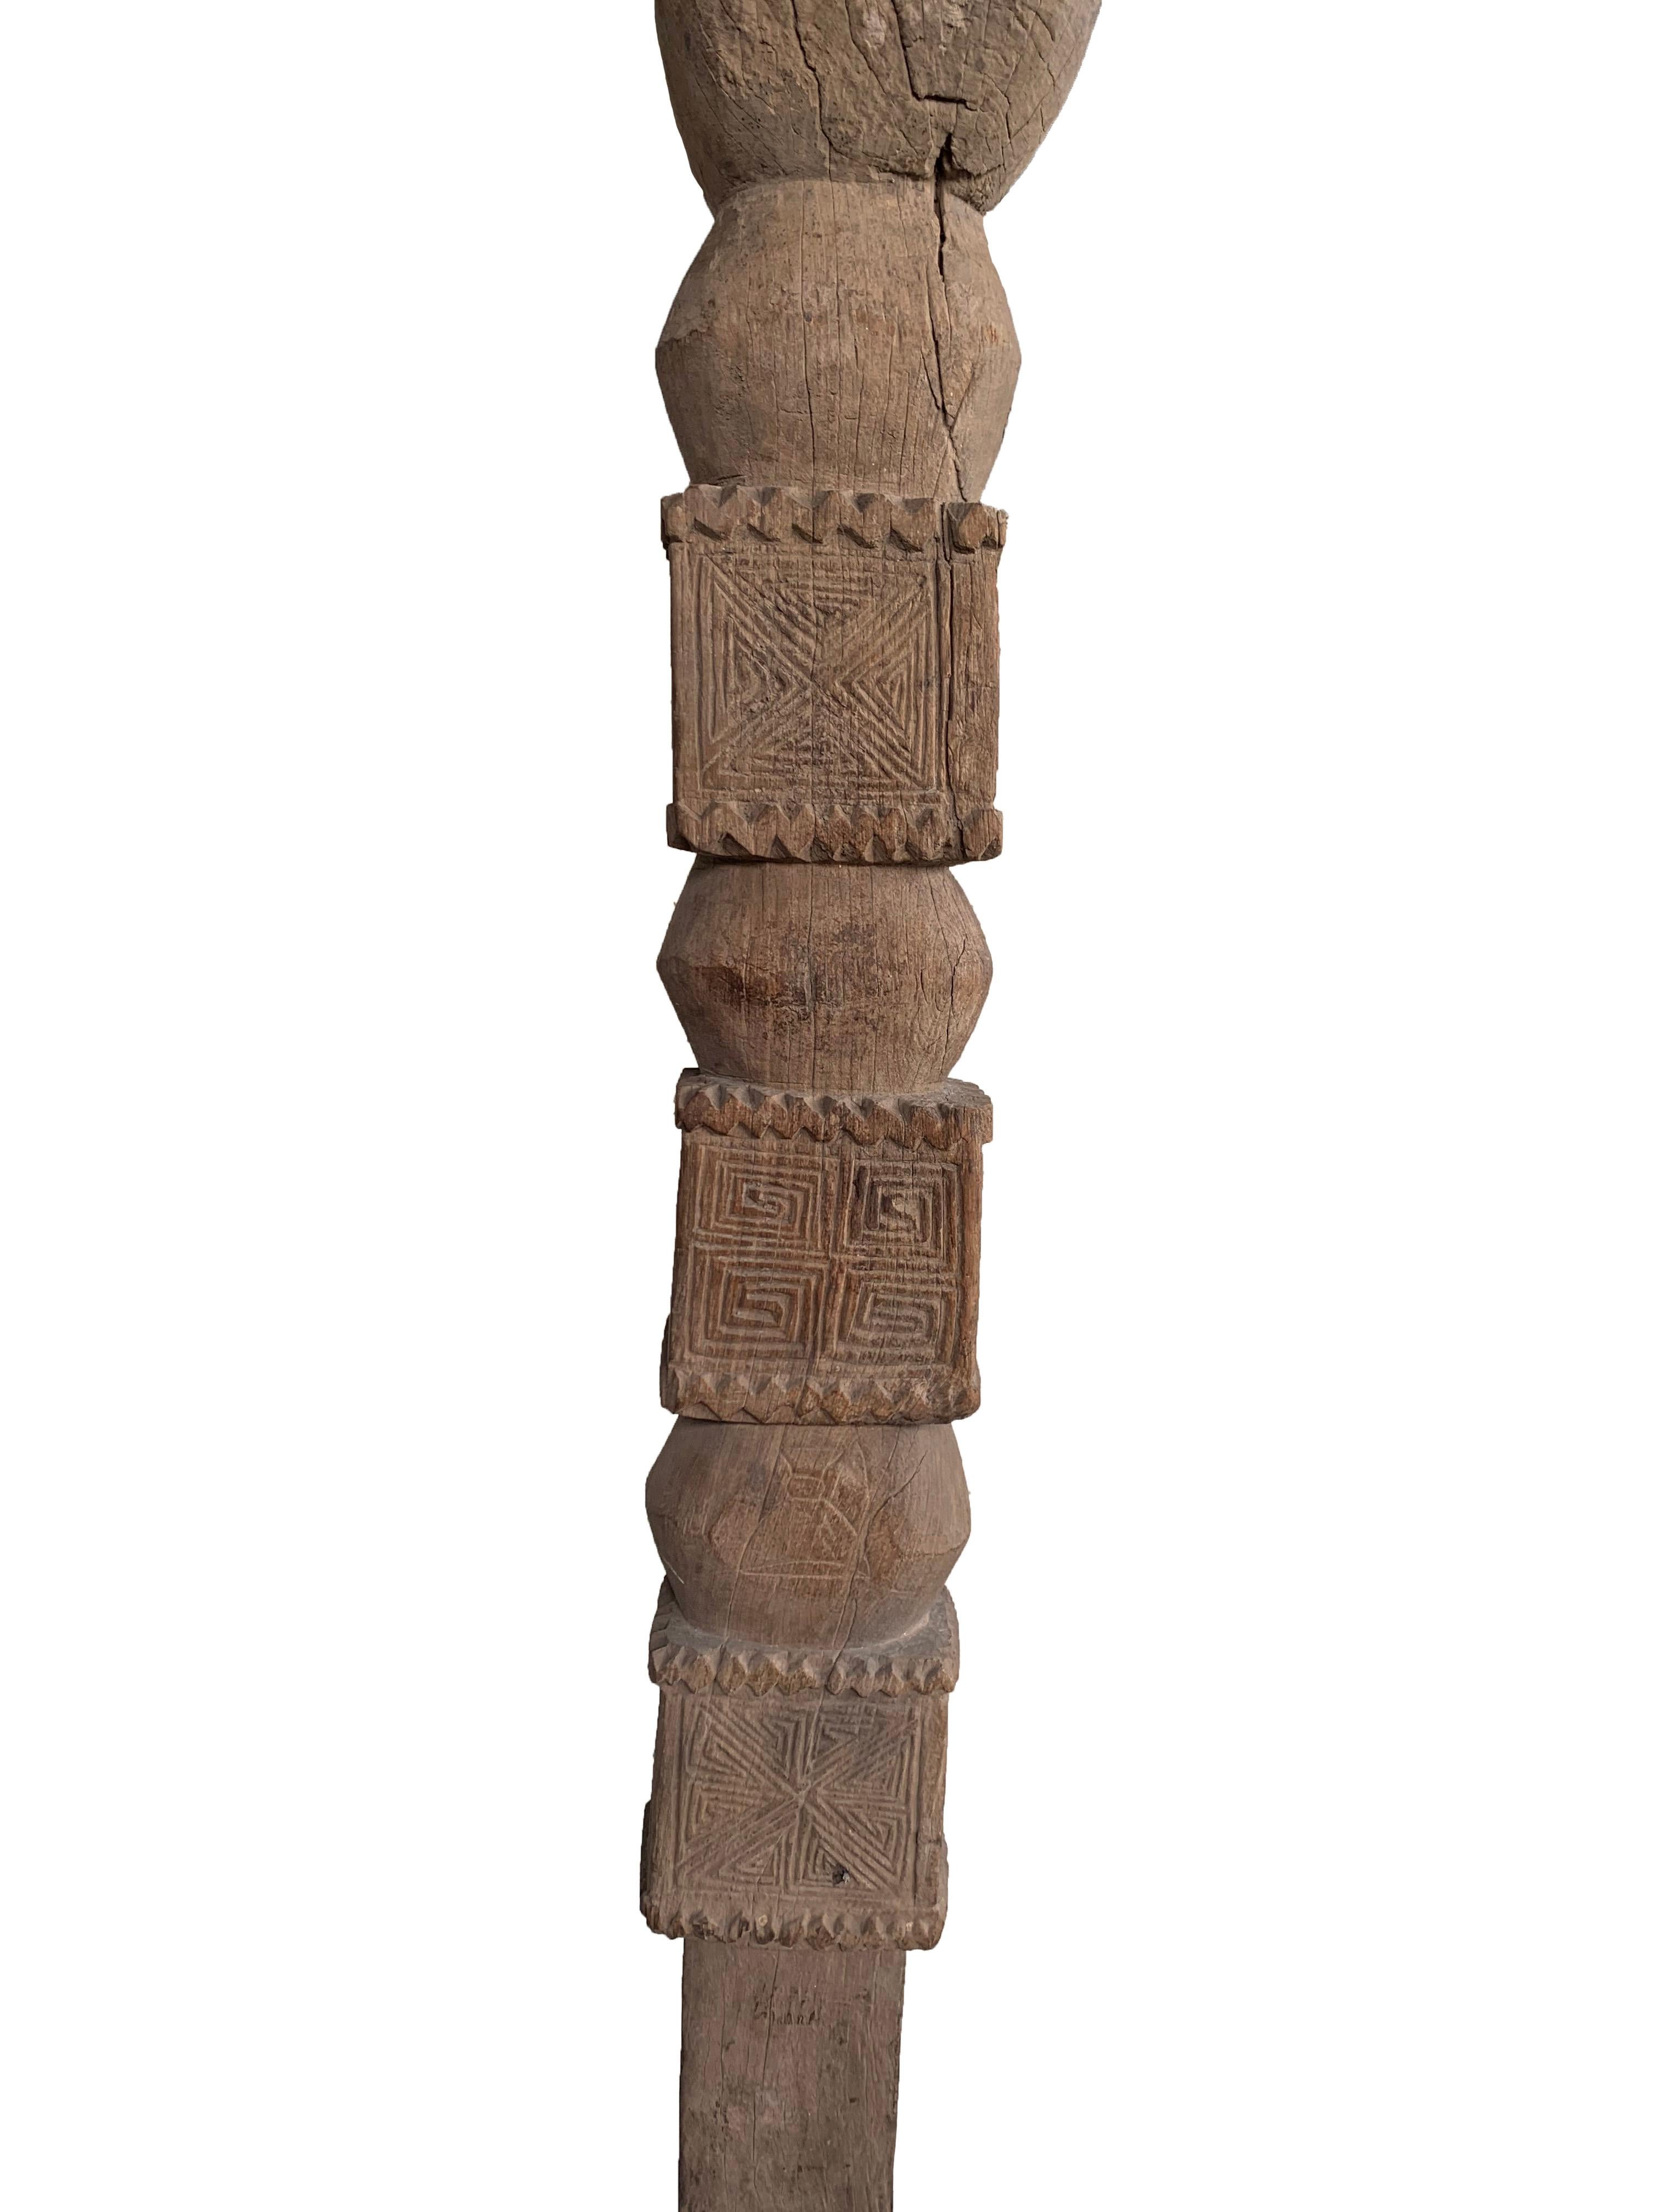 A tribal architectural column crafted from a single hardwood block from Nias Island, Indonesia. Nias is home to one of Indonesian most vibrant and warrior cultures. The present column bears distinct tribal patterns and would have once provided